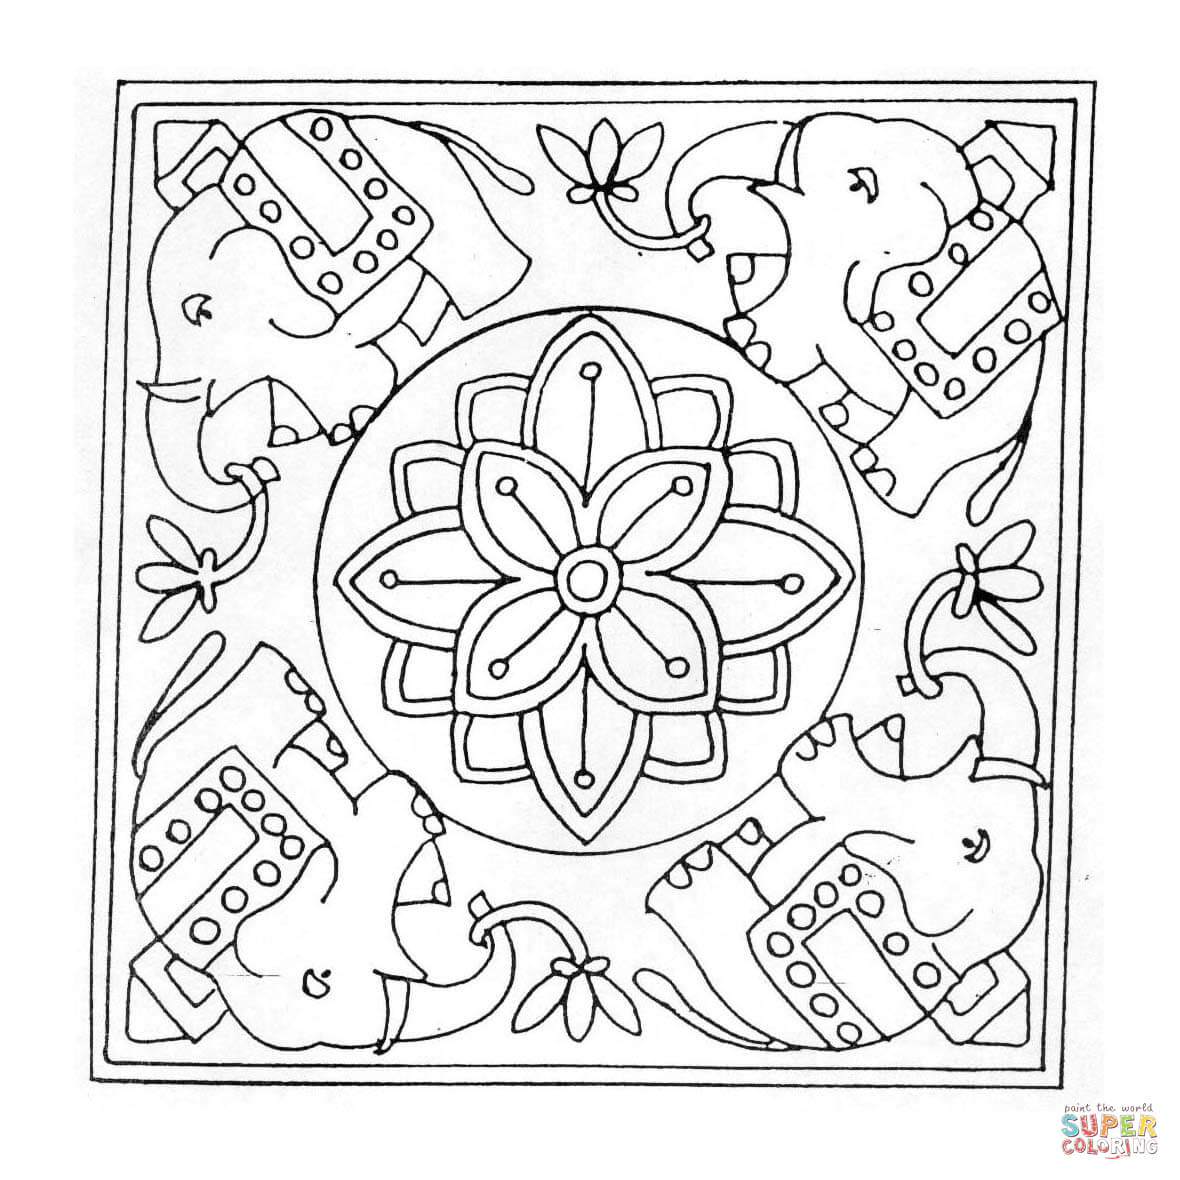 Elephant mandala coloring page free printable coloring pages